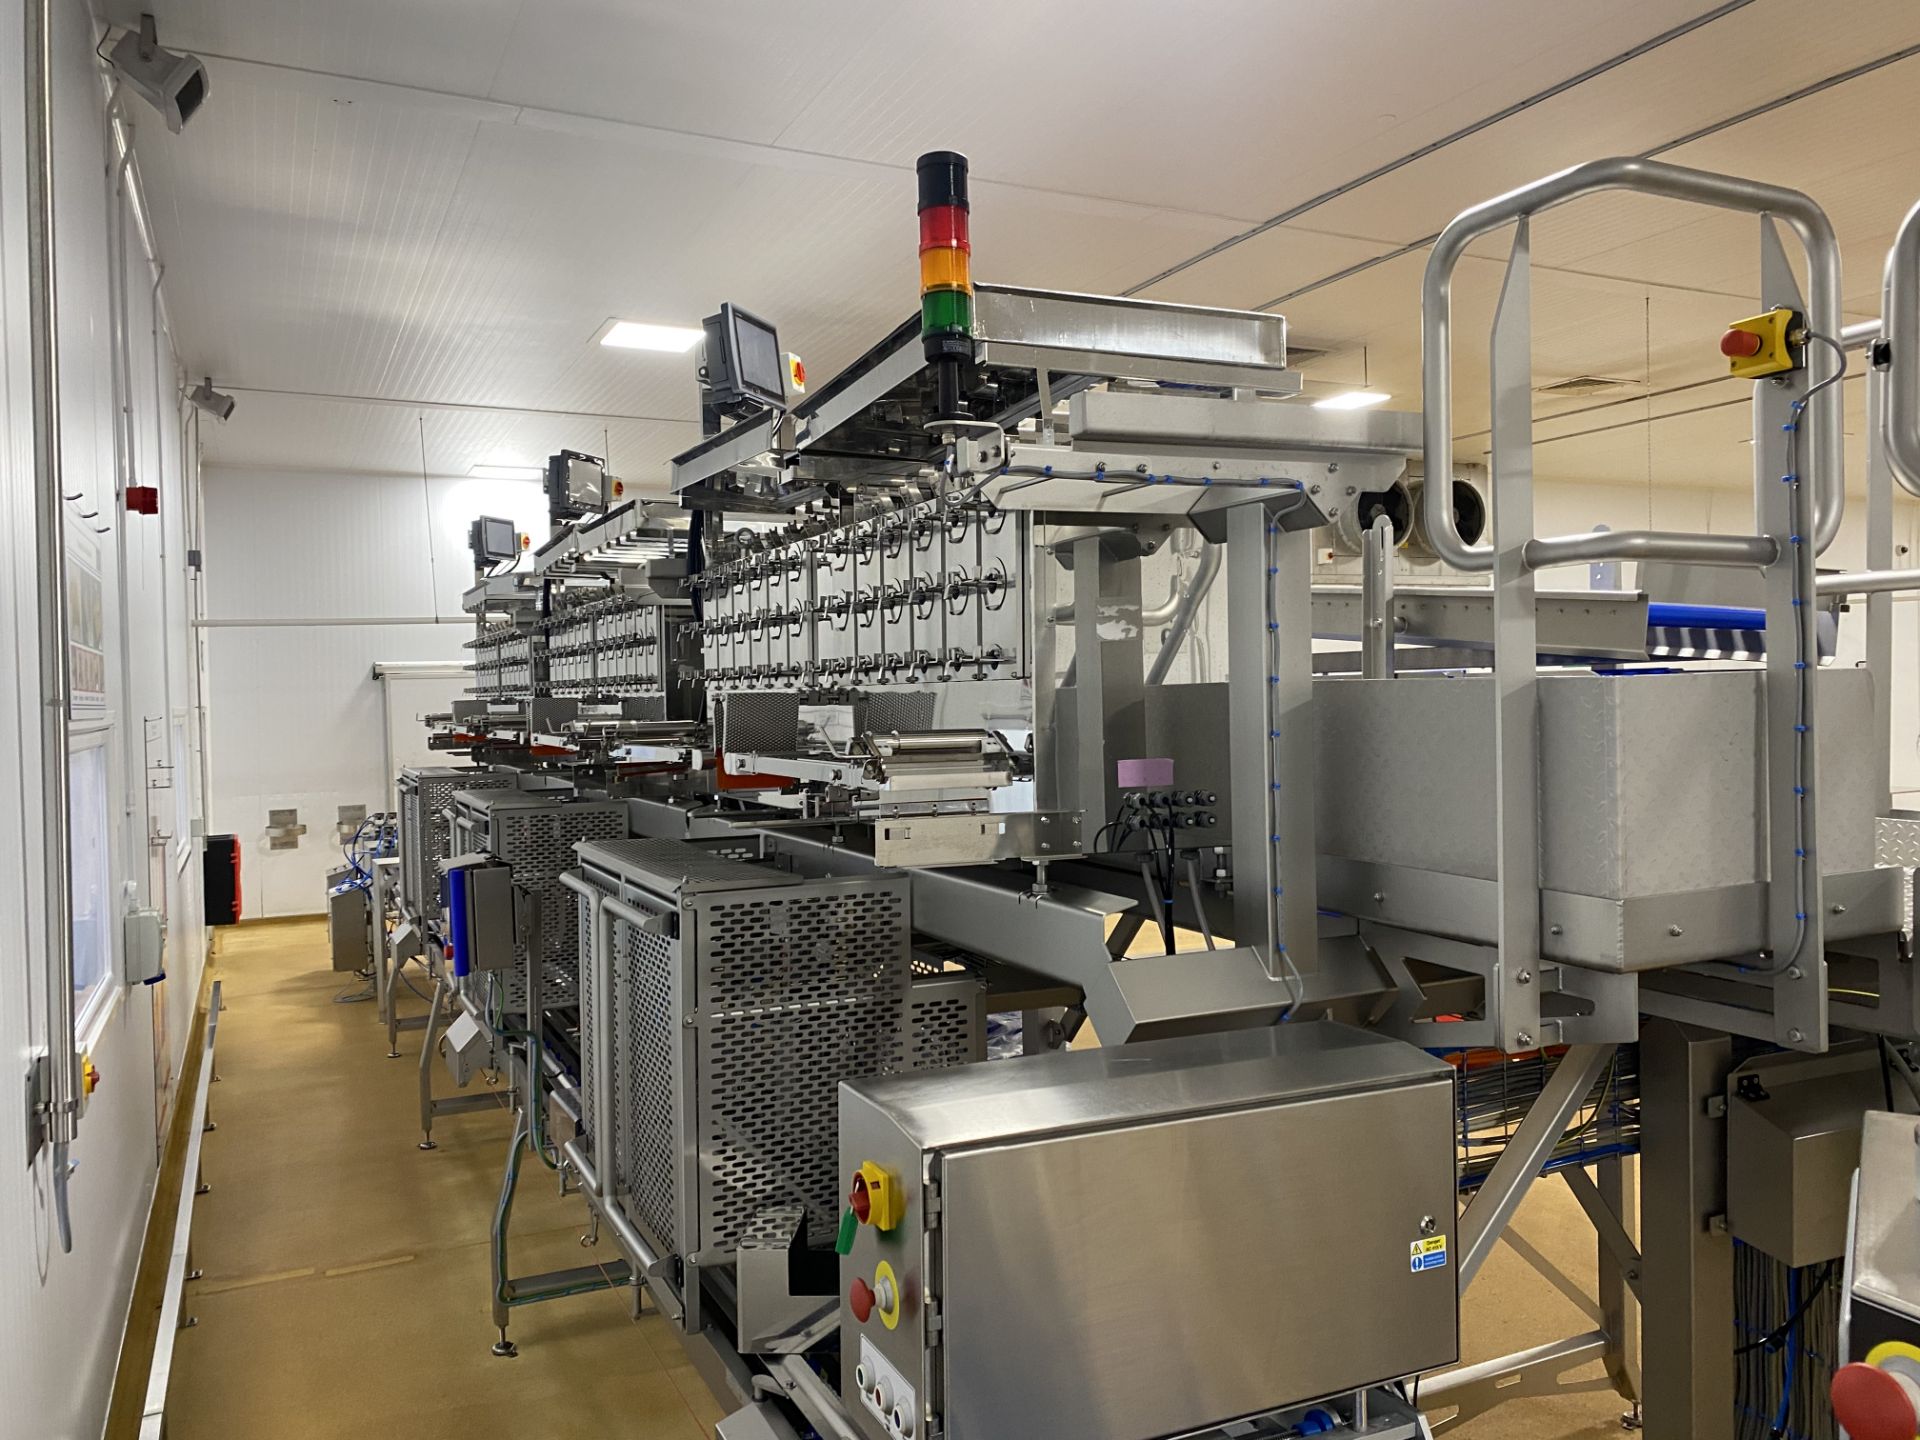 Ishida High speed 12 Head fresh fruit weighing system including access platform, product tray - Image 5 of 10